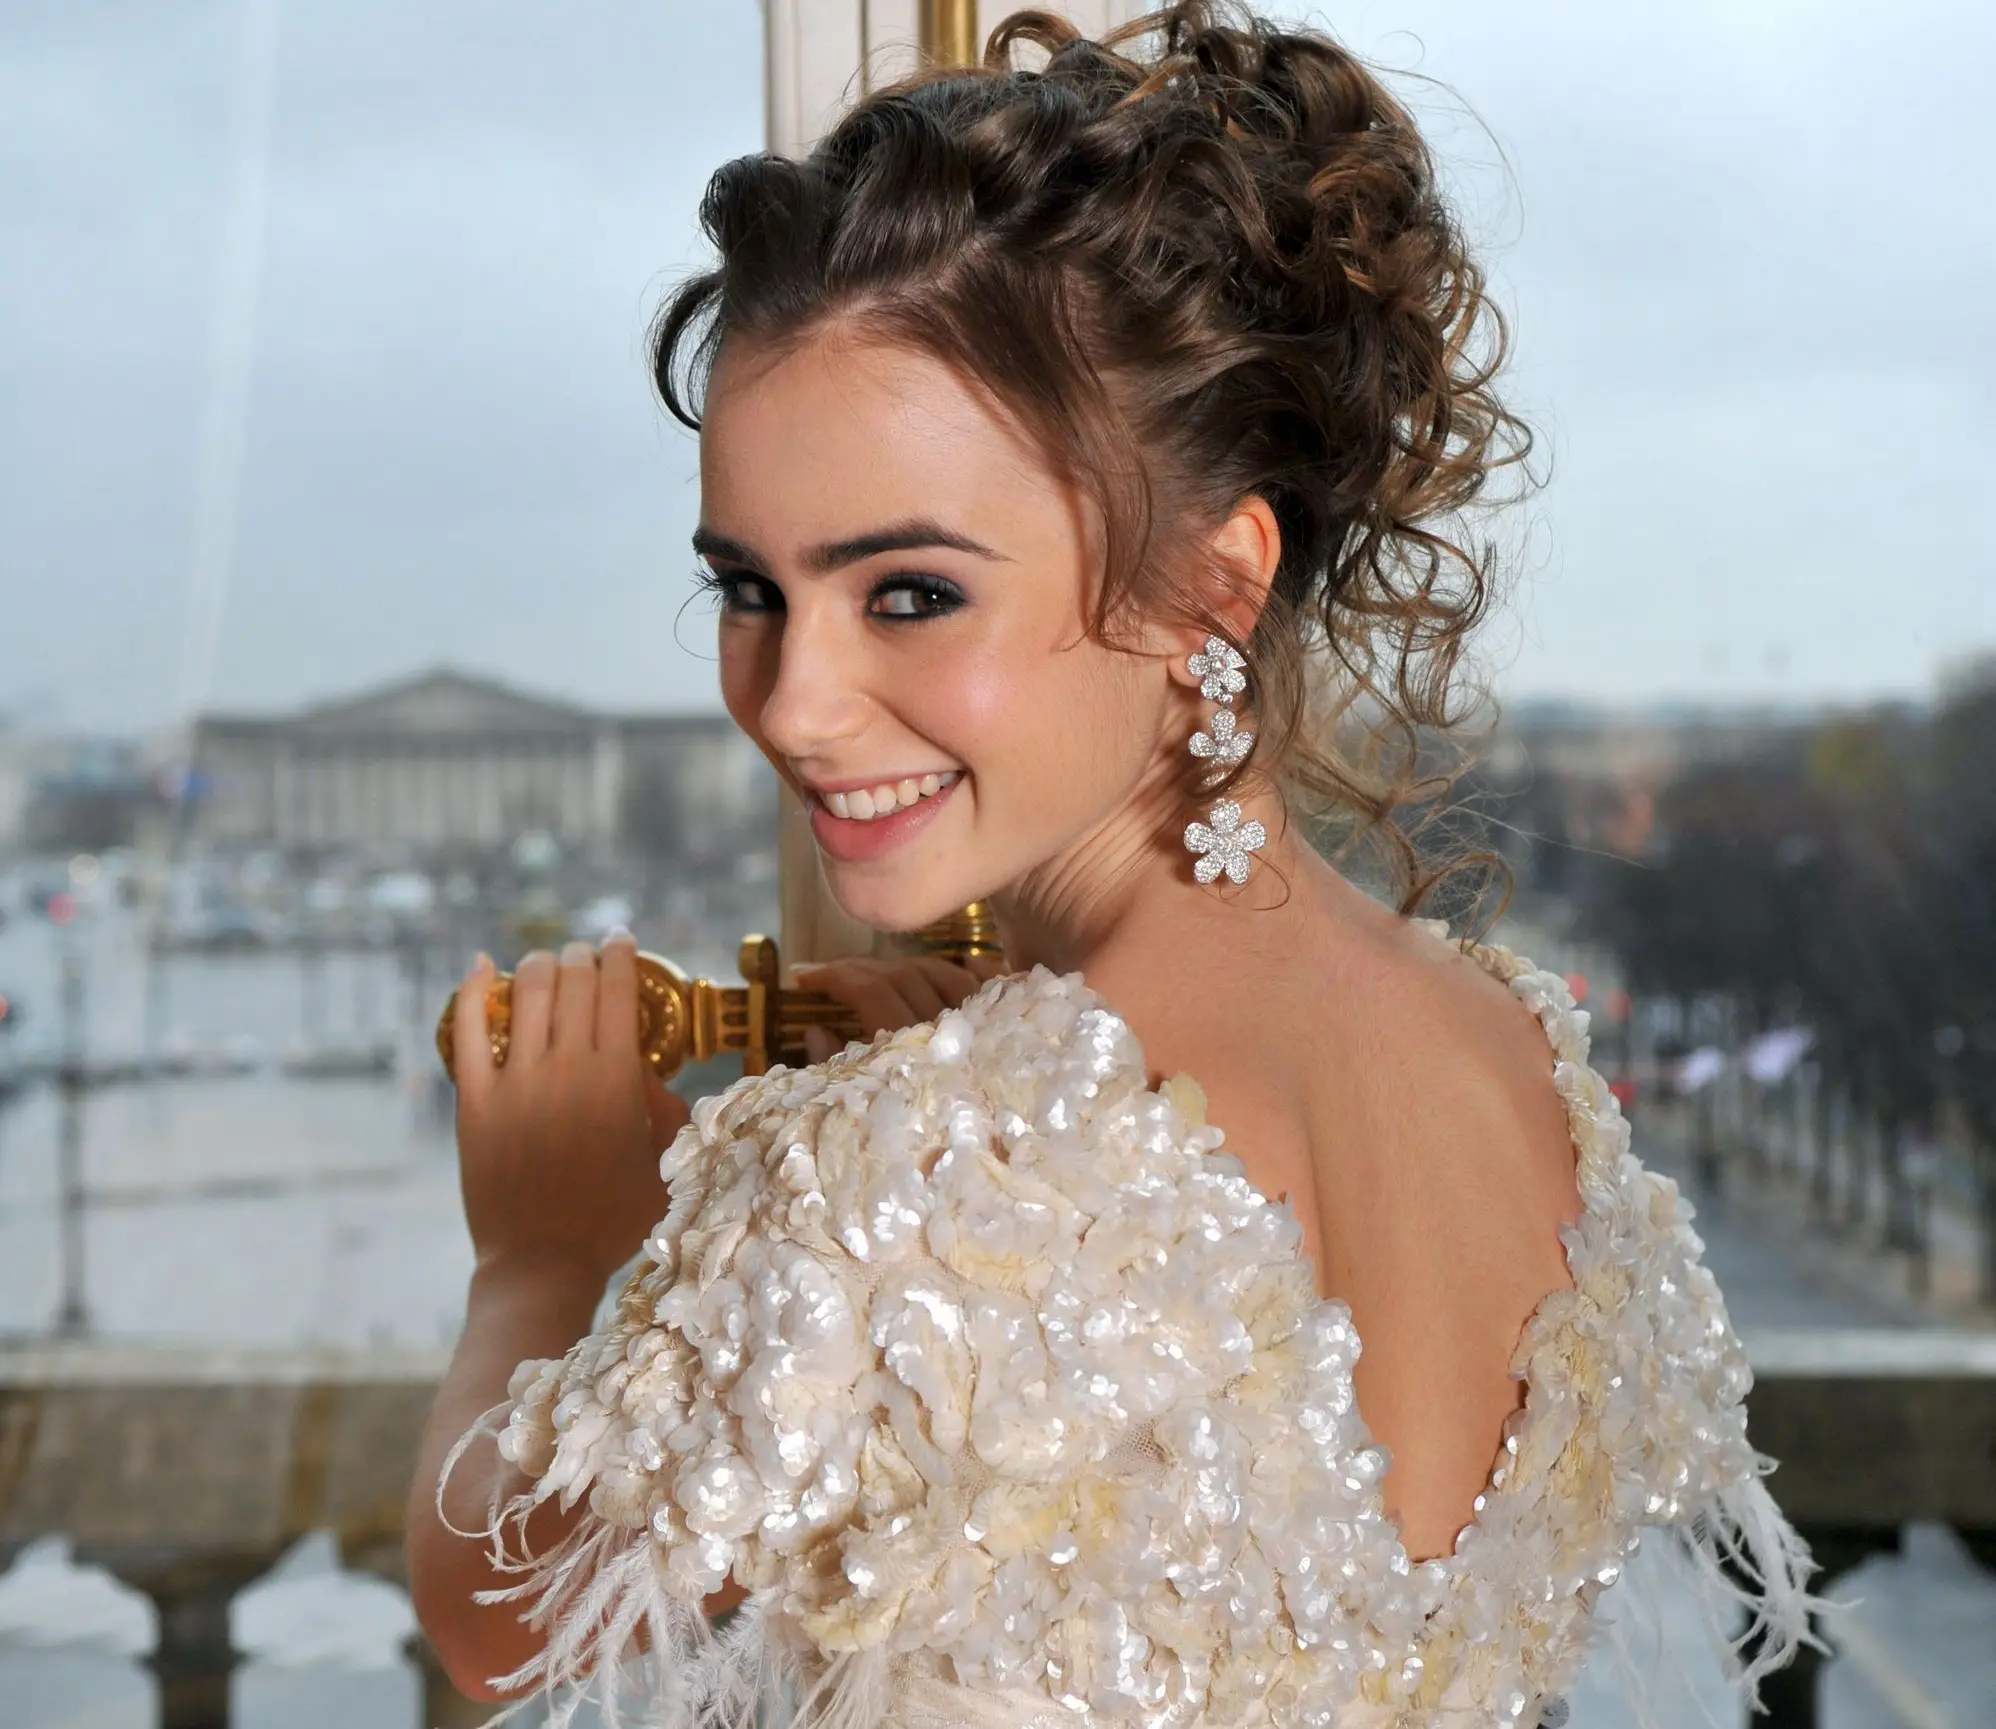 Lily Collins at the 17th Annual Paris Crillon Ball on November 23rd, 2007.